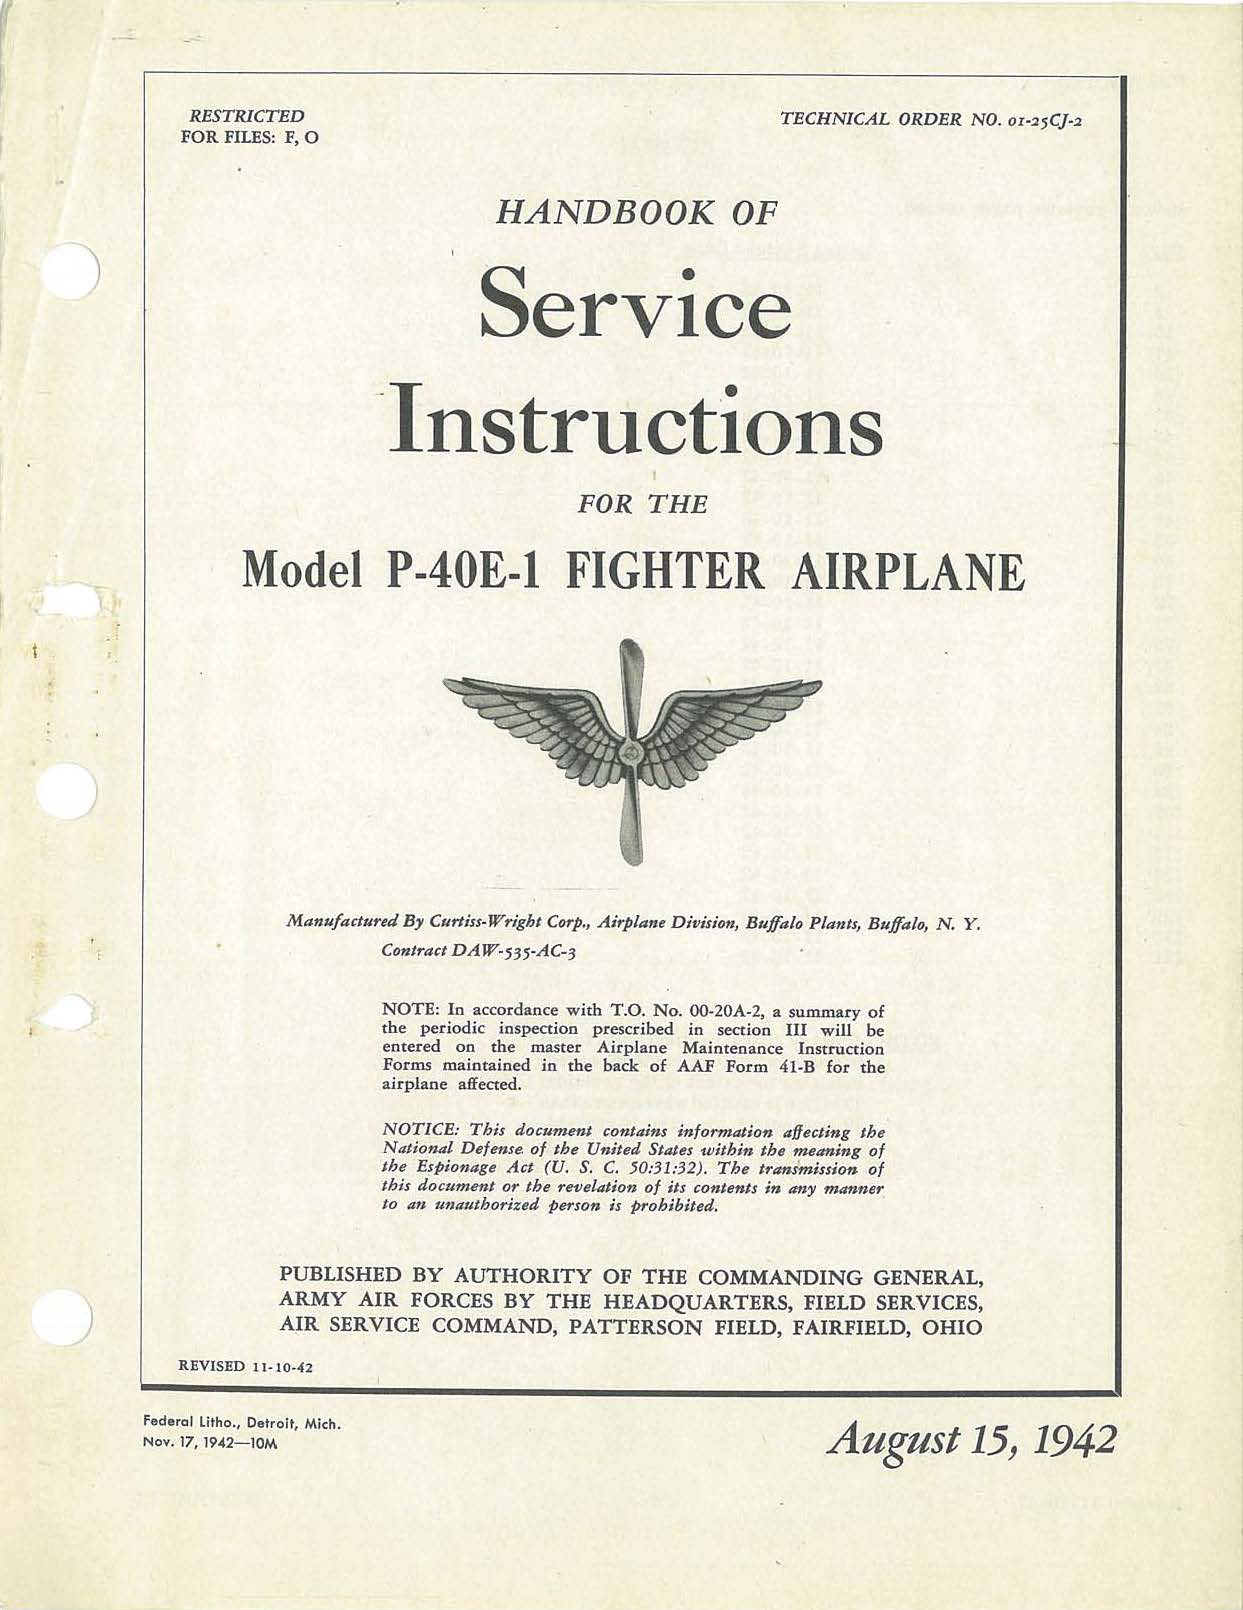 Sample page 1 from AirCorps Library document: Service Instructions for P-40E-1 Fighter